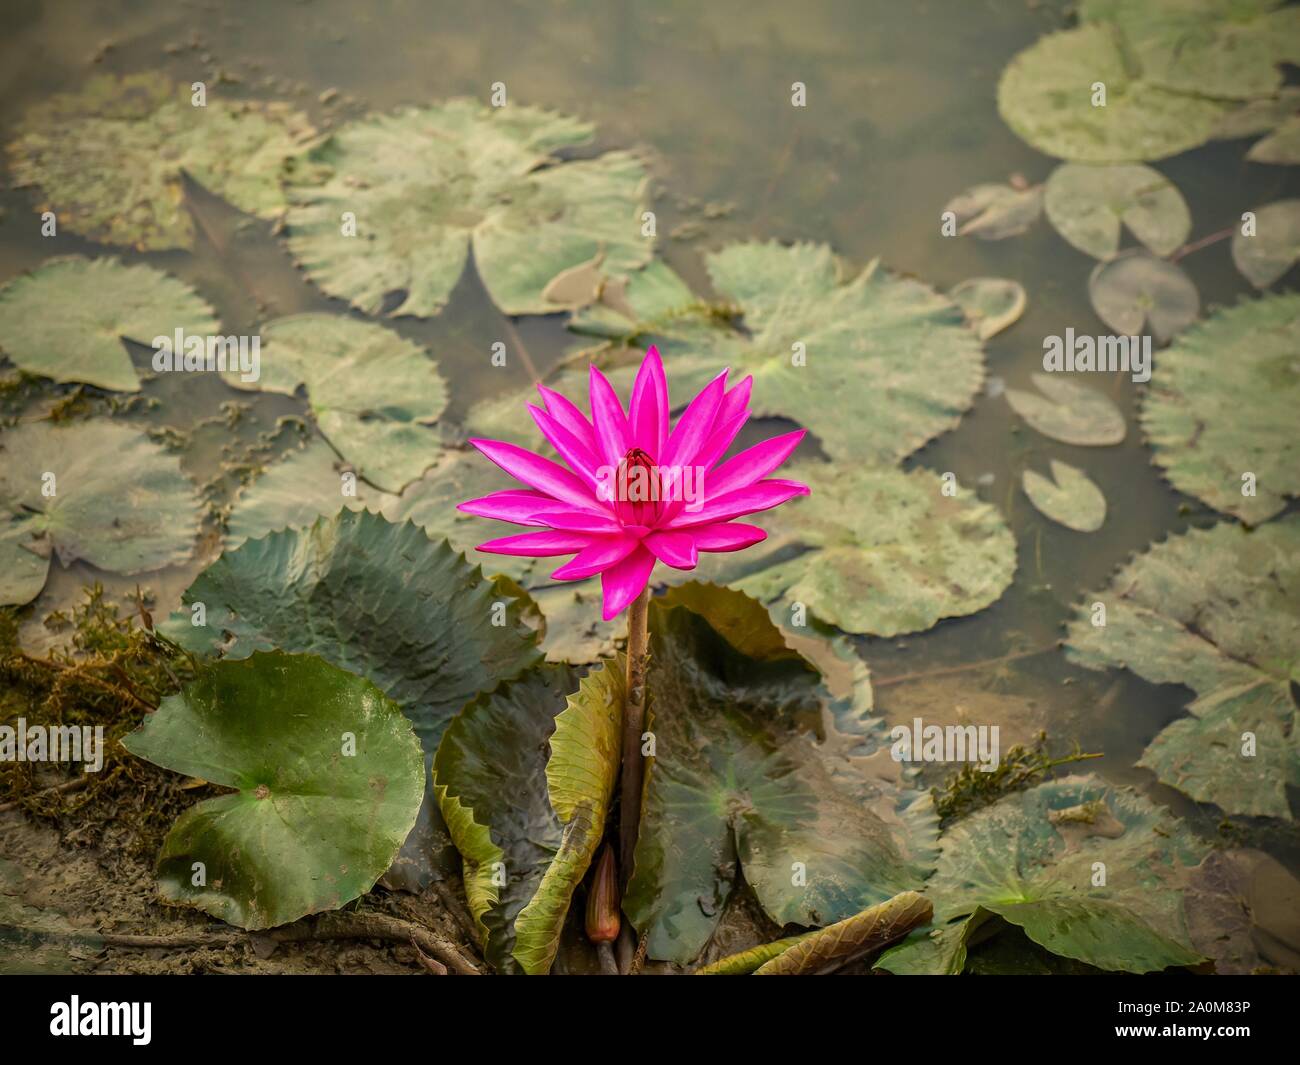 A single dark pink water lily (Latin - Nymphaea) blooming in a pond in the Angkor Wat temple complex in Cambodia. Stock Photo